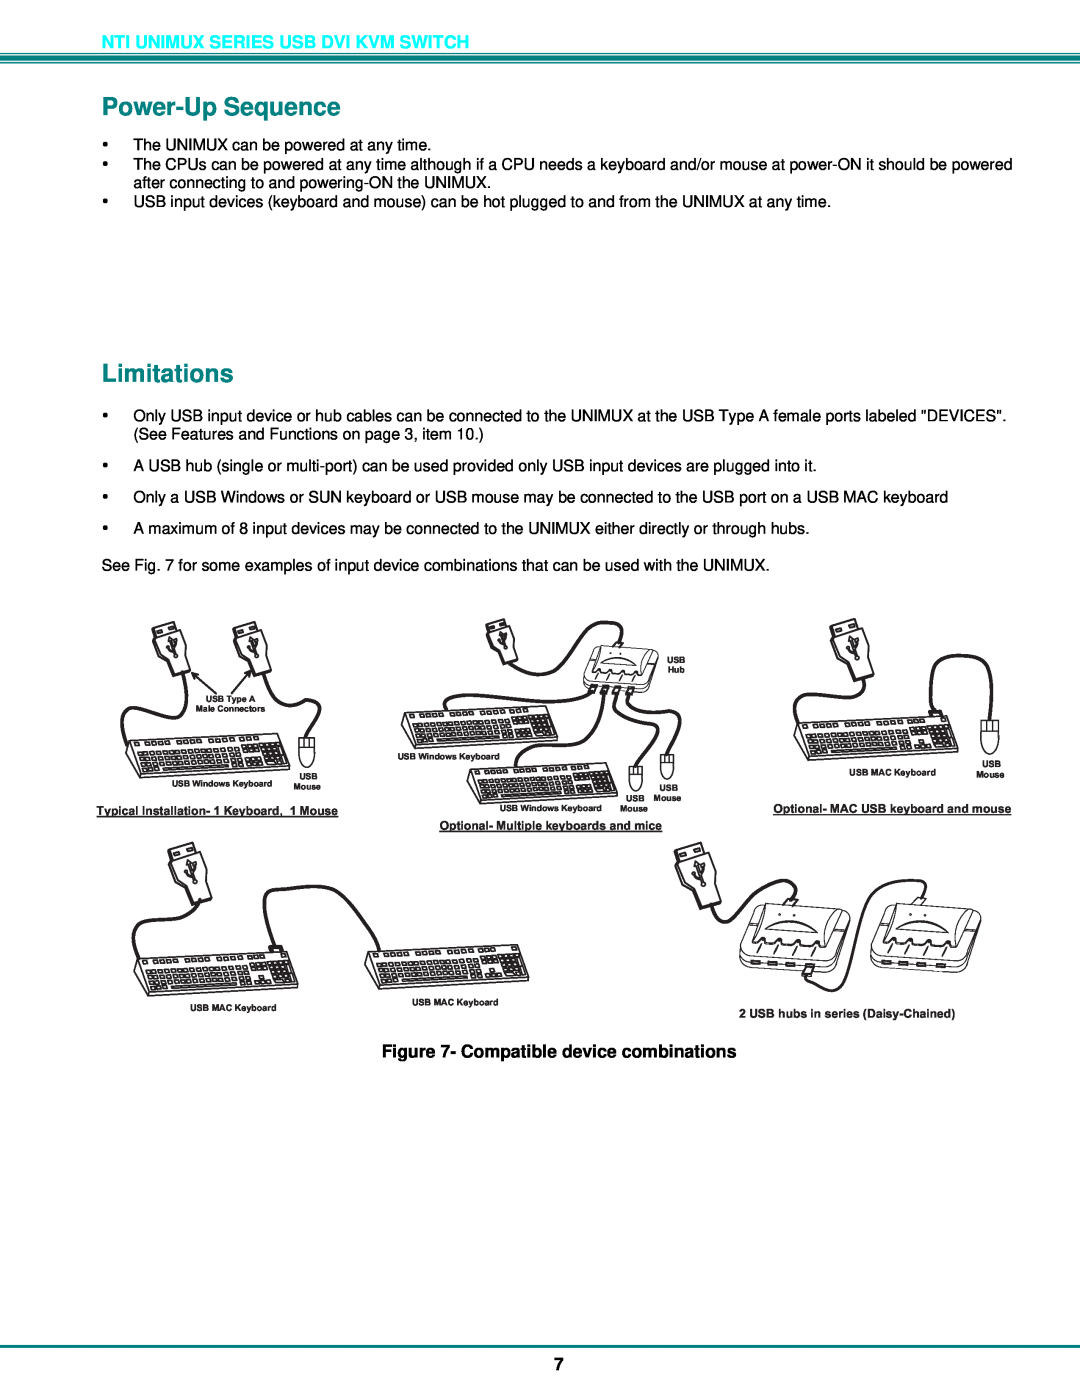 Network Technologies DVI-4 operation manual Power-Up Sequence, Limitations, Compatible device combinations 